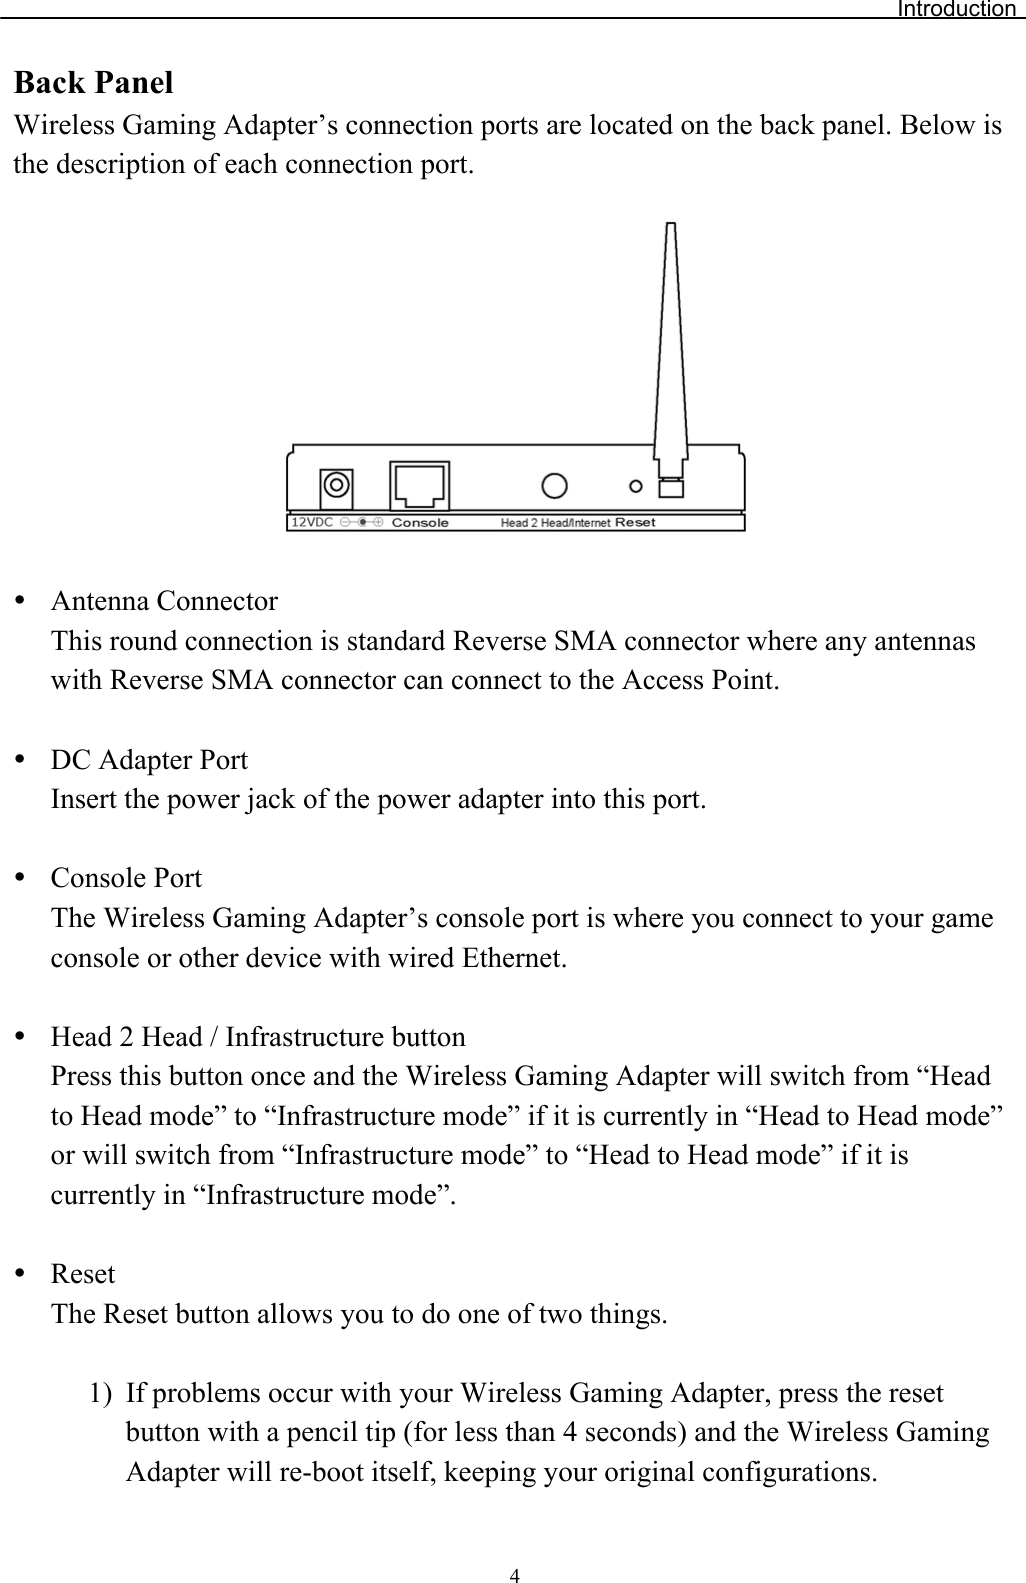 IntroductionBack Panel Wireless Gaming Adapter’s connection ports are located on the back panel. Below is the description of each connection port. yAntenna Connector This round connection is standard Reverse SMA connector where any antennas with Reverse SMA connector can connect to the Access Point. yDC Adapter Port Insert the power jack of the power adapter into this port. yConsole Port The Wireless Gaming Adapter’s console port is where you connect to your gameconsole or other device with wired Ethernet.yHead 2 Head / Infrastructure button Press this button once and the Wireless Gaming Adapter will switch from “Head to Head mode” to “Infrastructure mode” if it is currently in “Head to Head mode”or will switch from “Infrastructure mode” to “Head to Head mode” if it is currently in “Infrastructure mode”. yResetThe Reset button allows you to do one of two things. 1) If problems occur with your Wireless Gaming Adapter, press the reset button with a pencil tip (for less than 4 seconds) and the Wireless GamingAdapter will re-boot itself, keeping your original configurations. 4